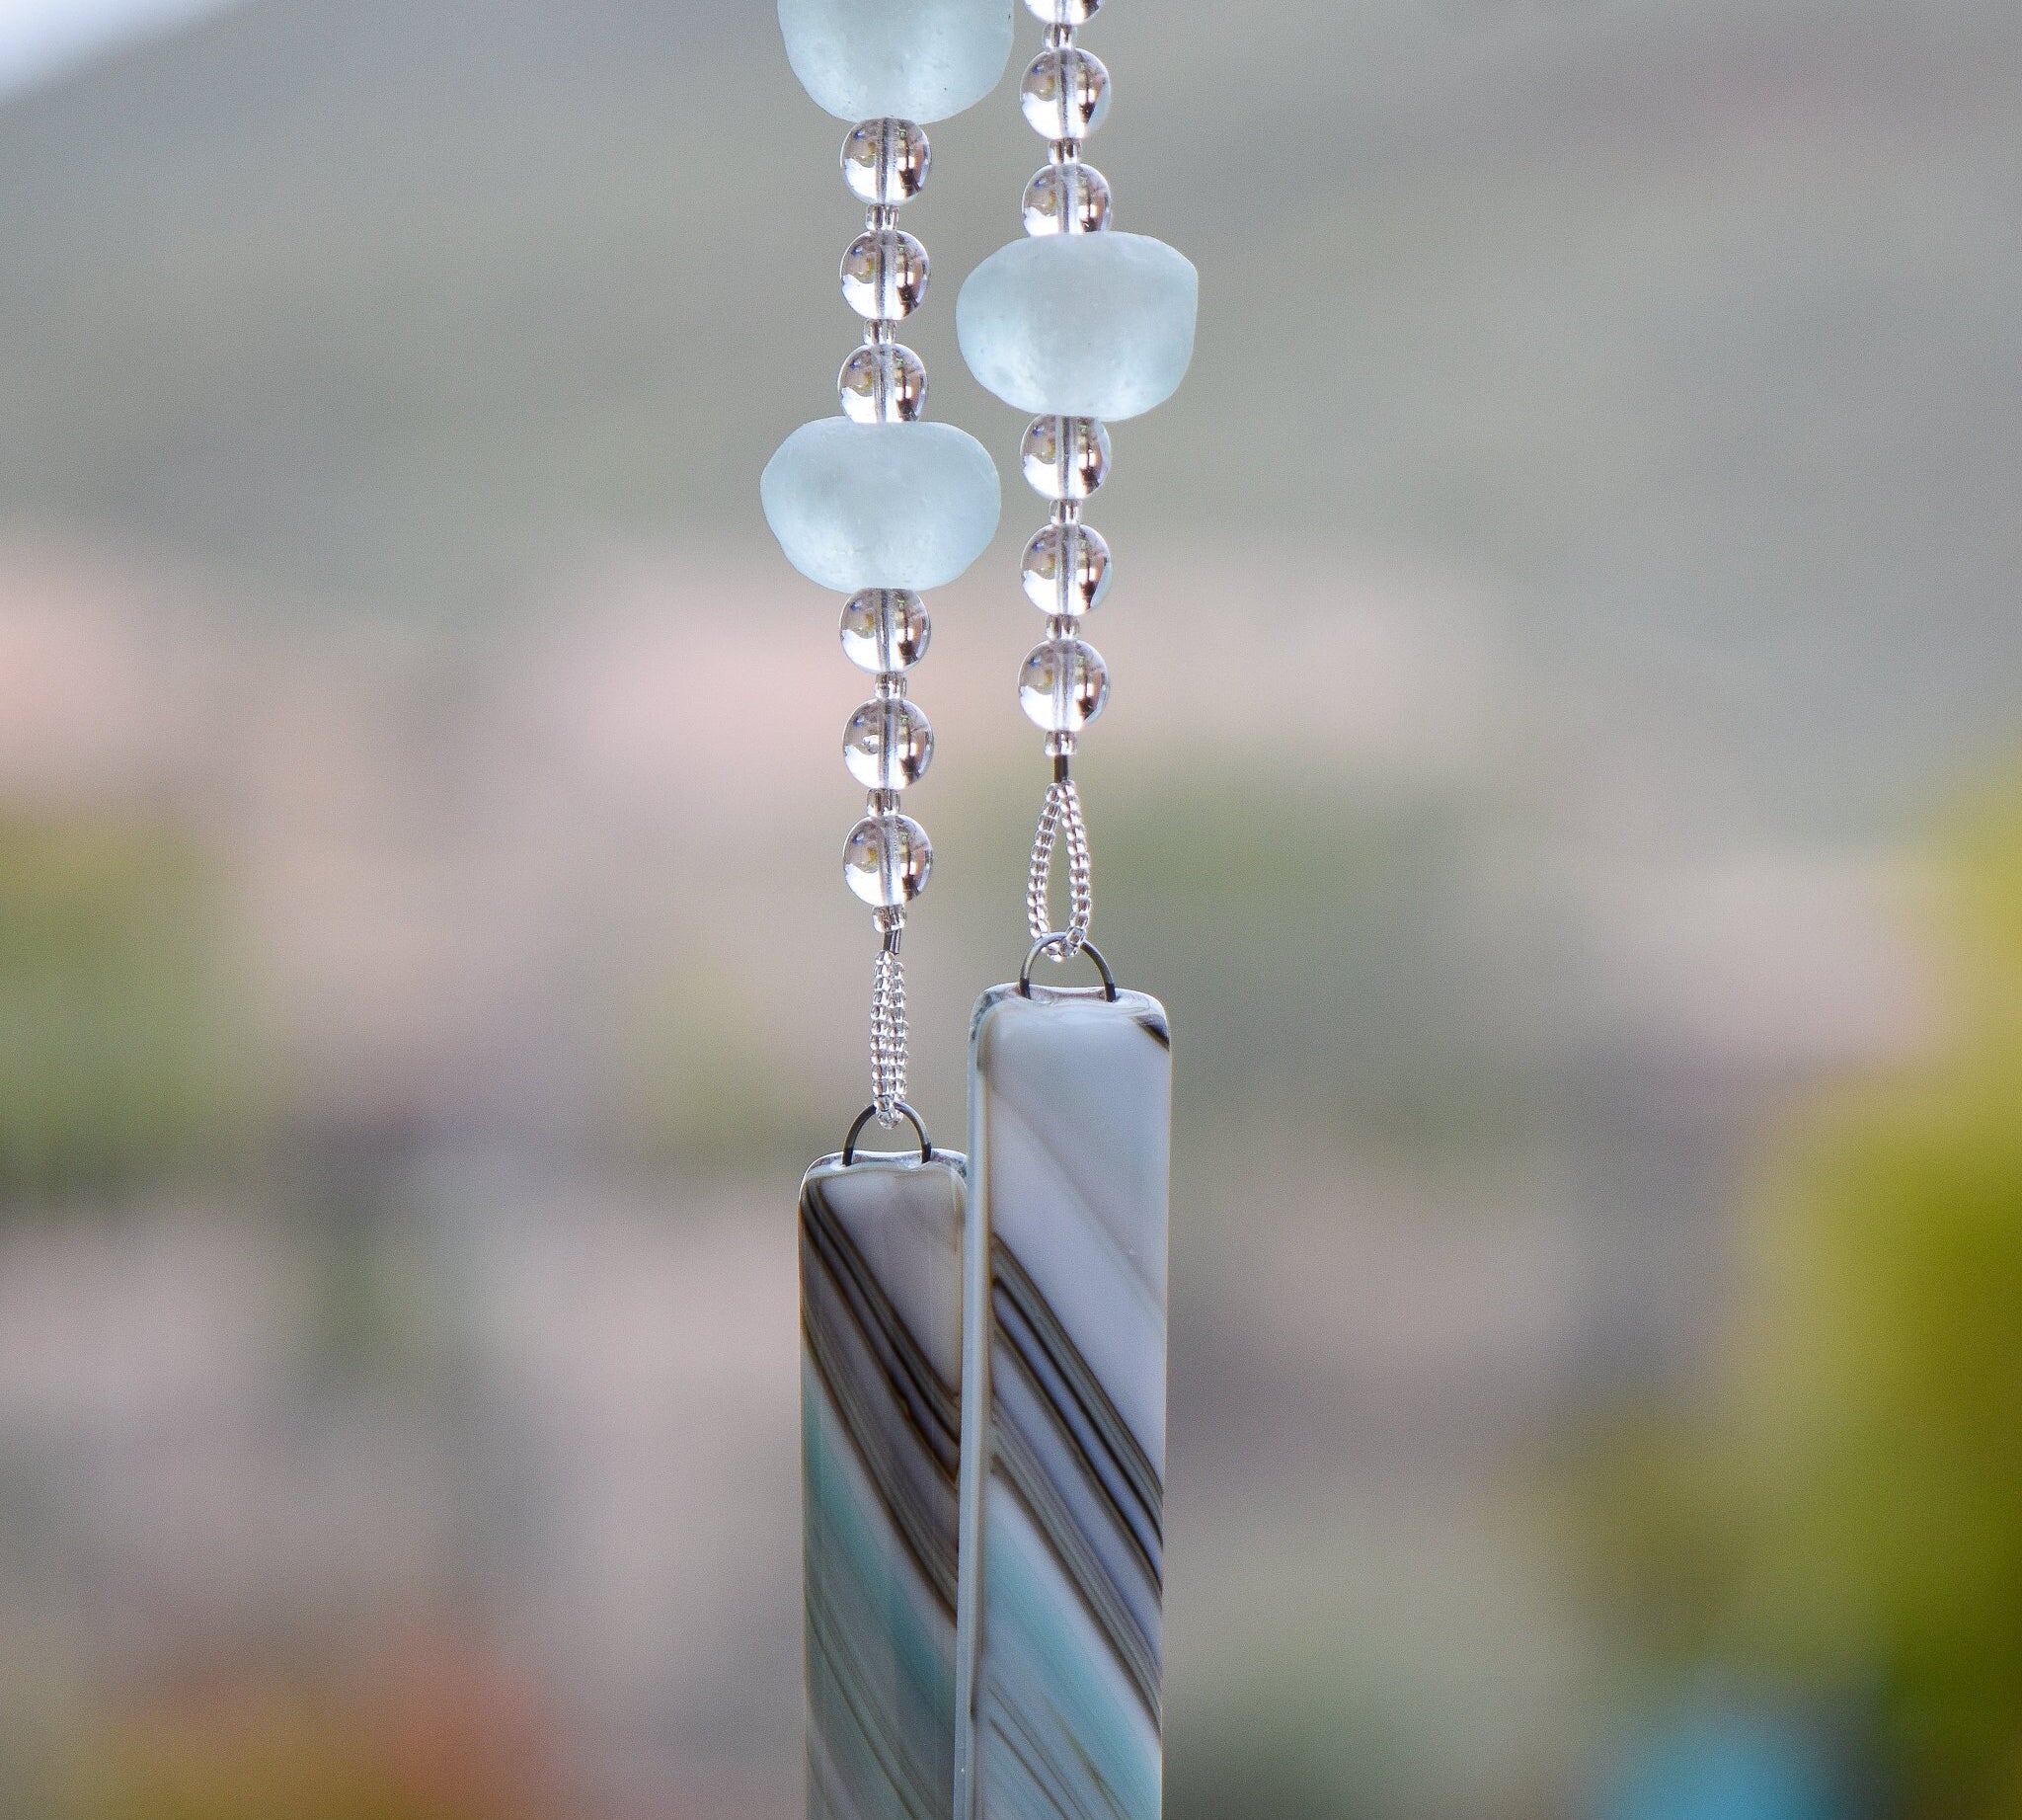 Large aqua-colored Ghana, Africa beads paired with smaller clear glass beads, hanging vertically, anchored by two pieces of fused glass with aqua, tan and gray swirl pattern